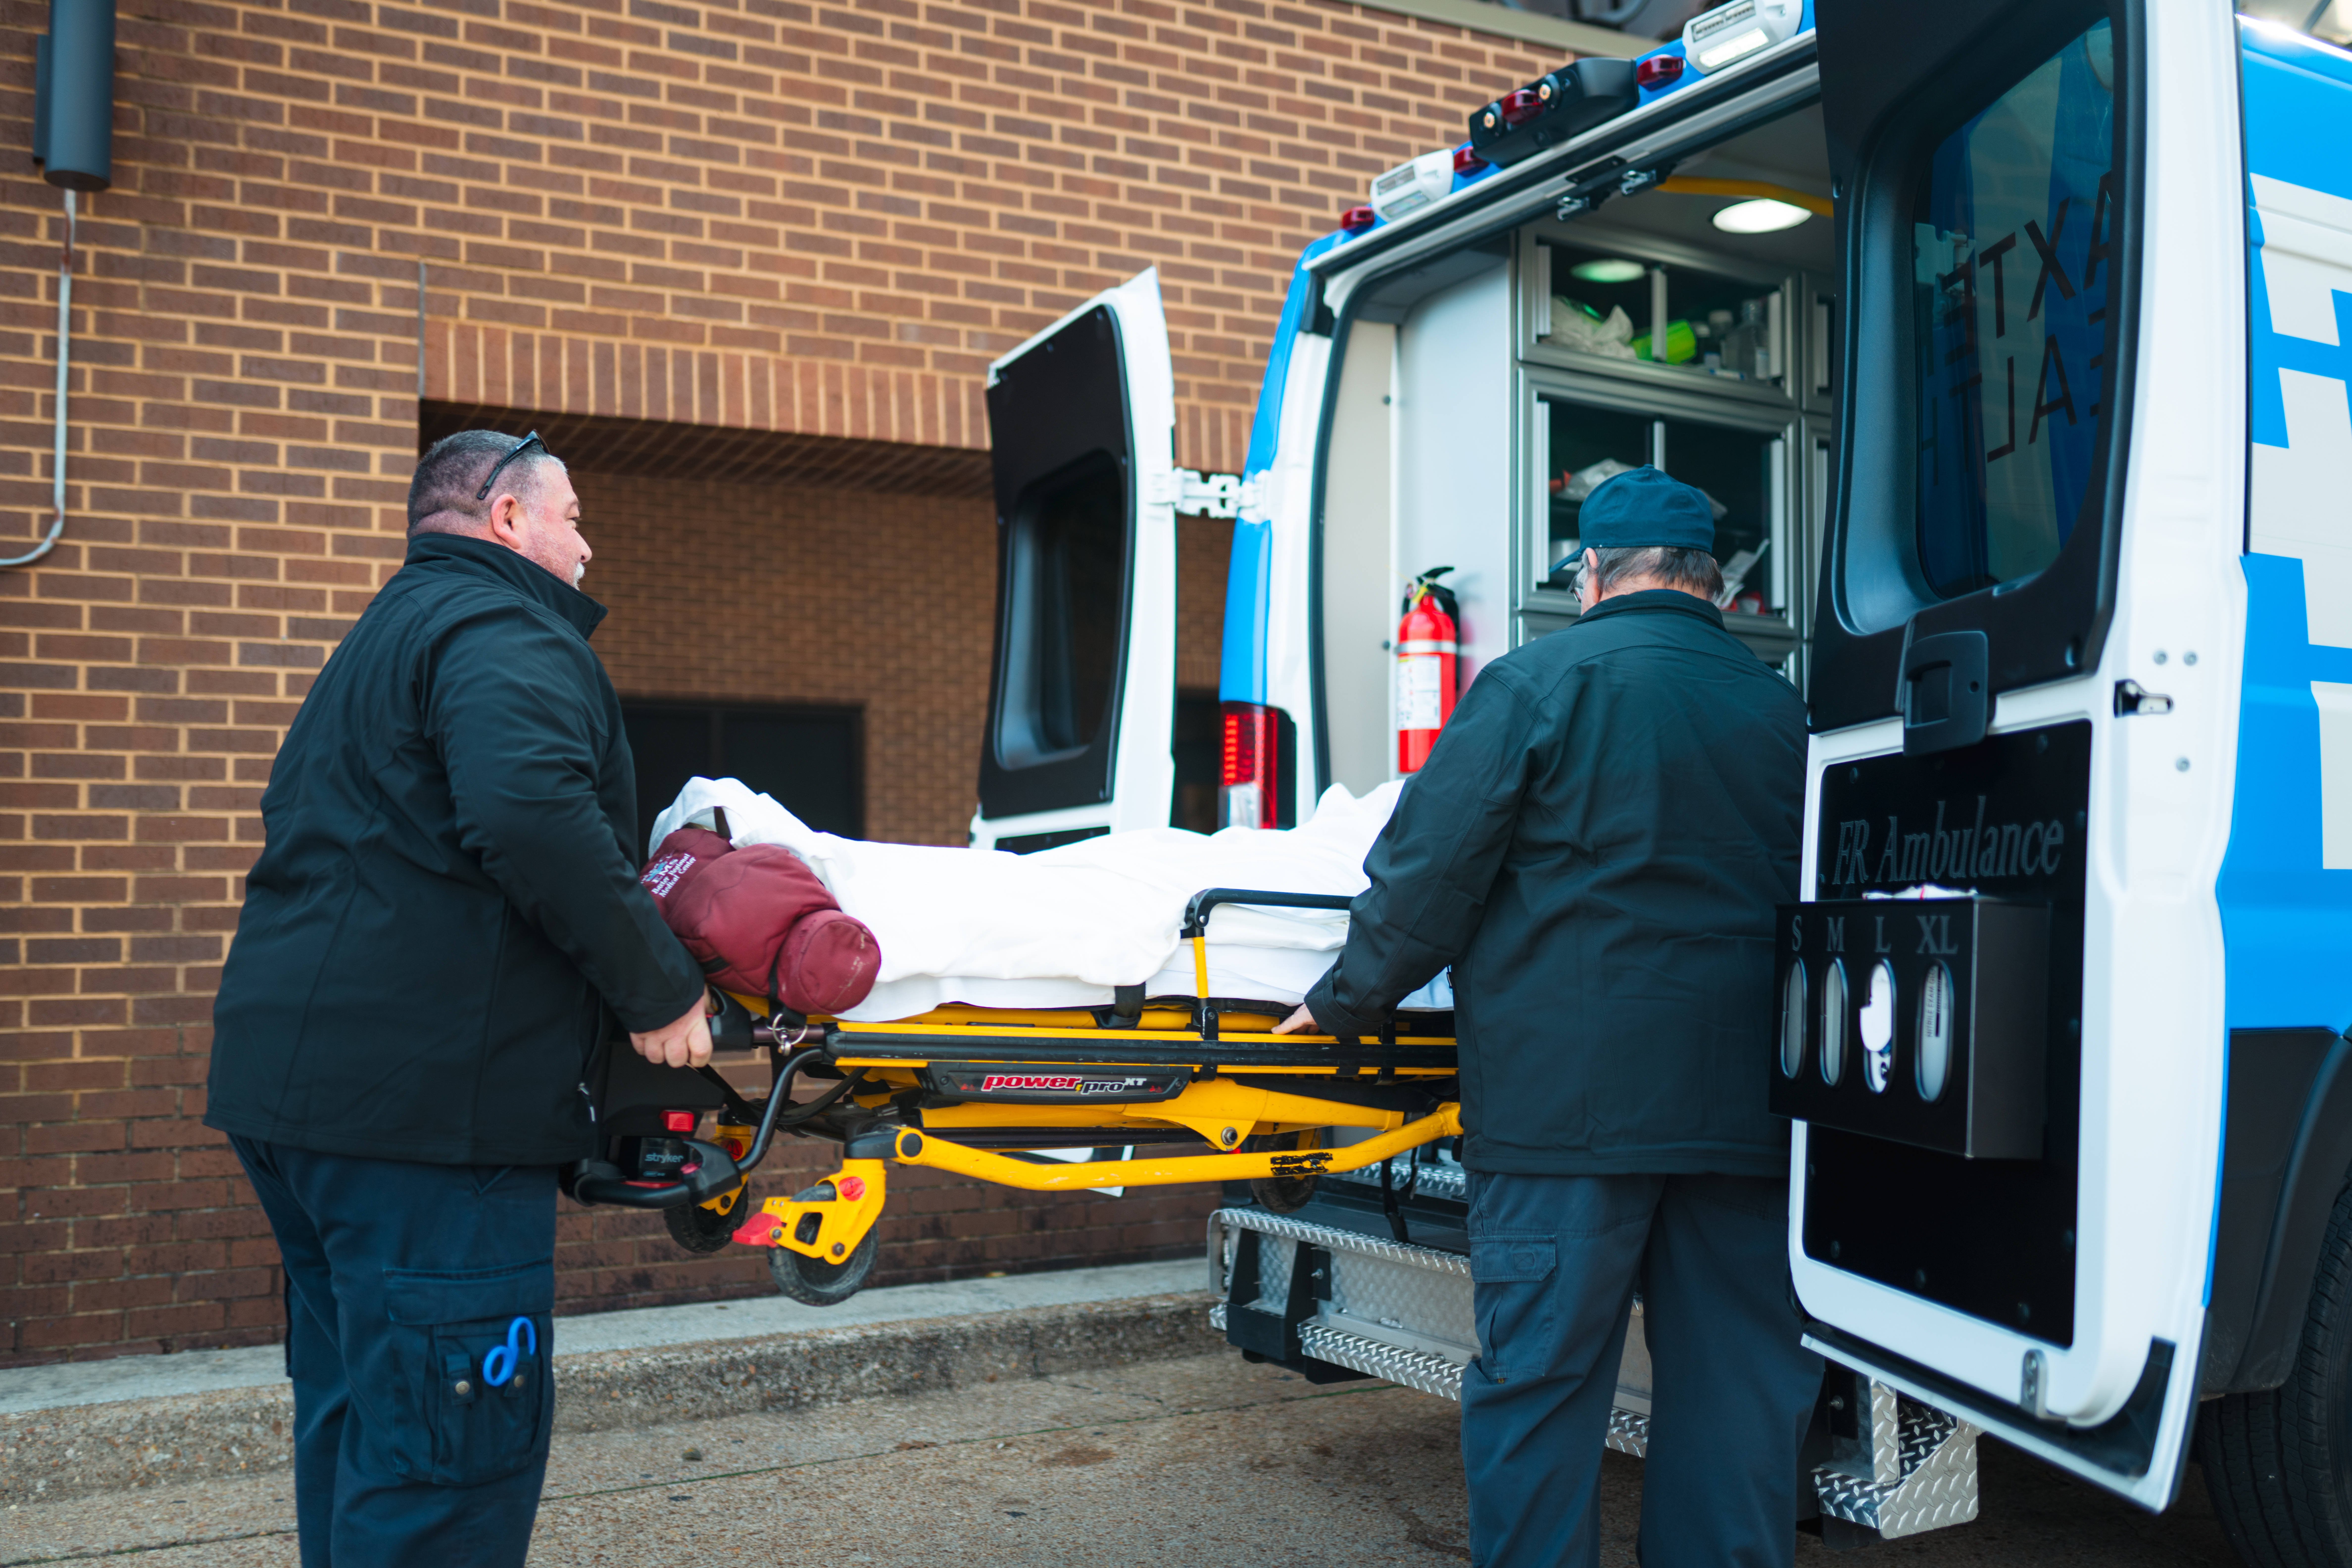 Emergency Medical Vehicle being unloaded by two male emergency service members